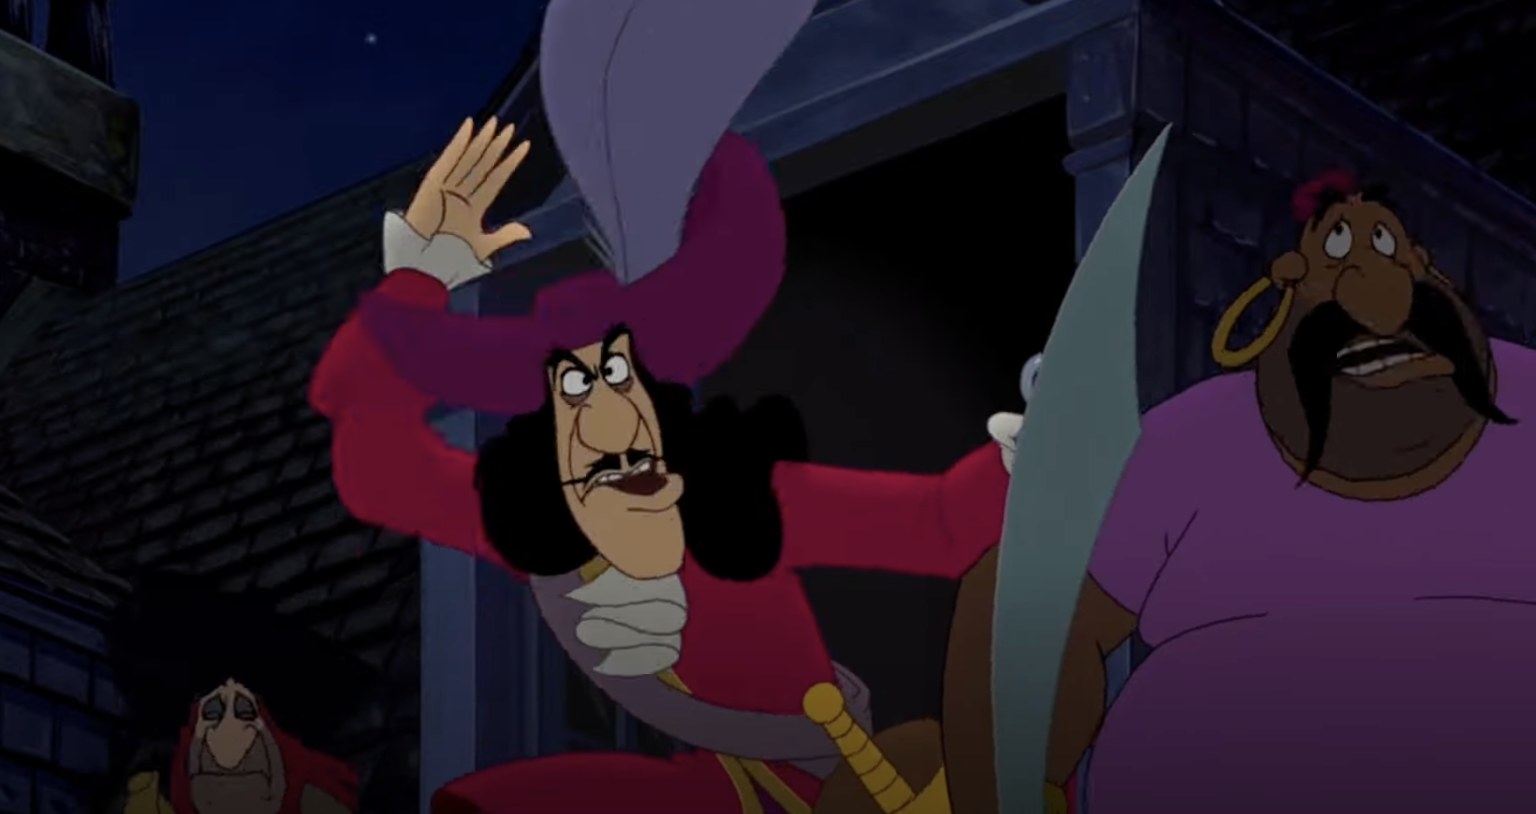 an animated man with a pirate hat and a sword emerges from a window with an angry look on his face